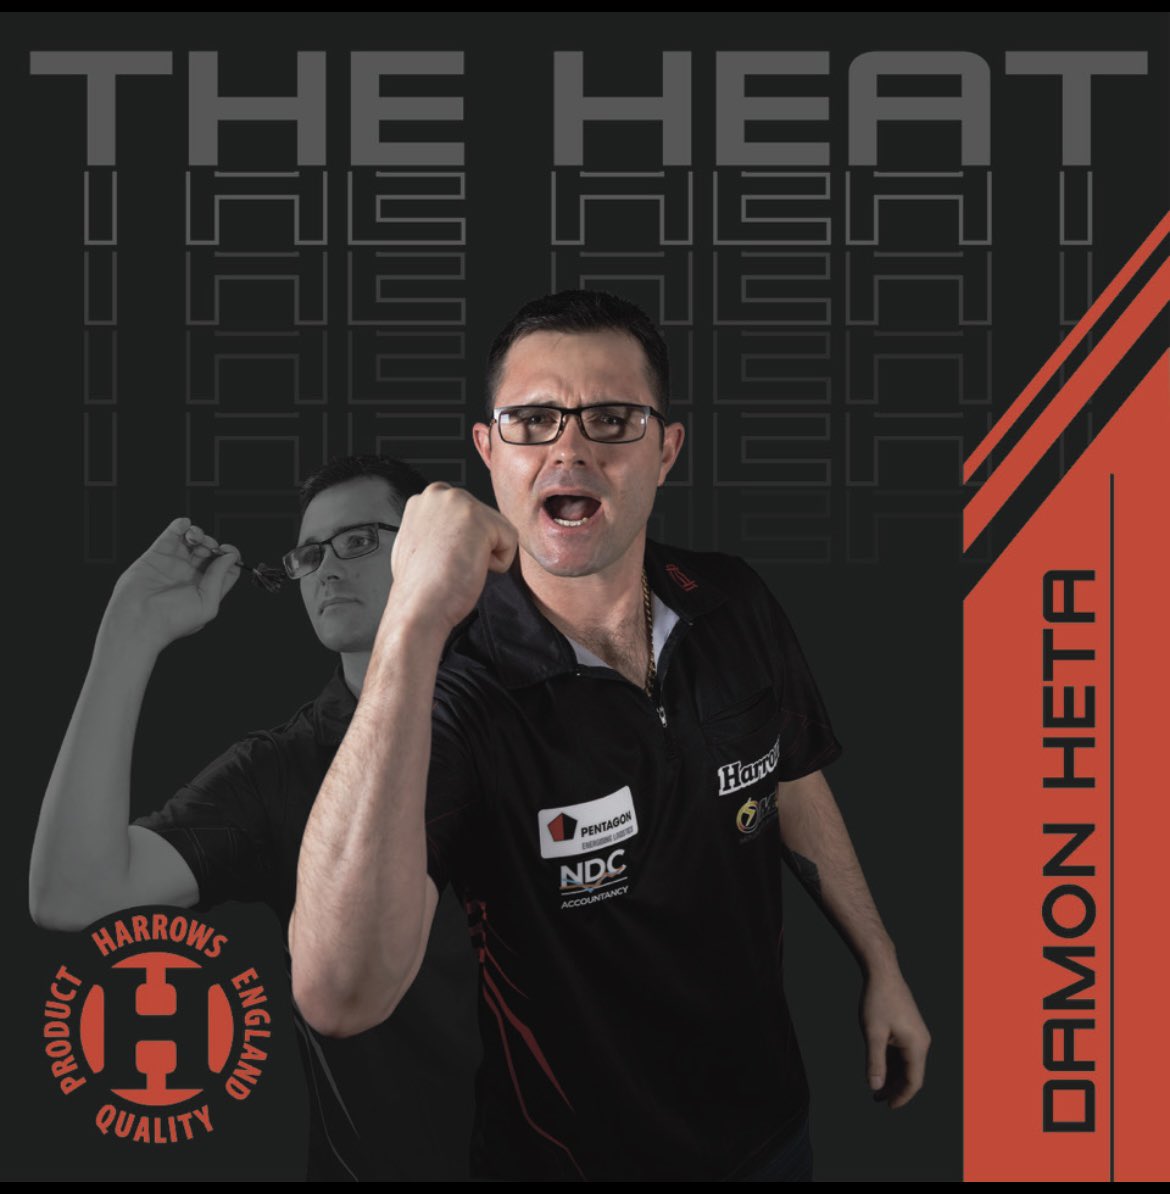 🎯Players Championship 14🎯

Damon Heta wins his 7th PDC title after beating Harrows teammate Luke Woodhouse 8-2.

Damon has been brilliant all weekend and now heads to the World Cup after winning his first title this year.

Well played Damo!

#TeamHarrows #DefyLimits